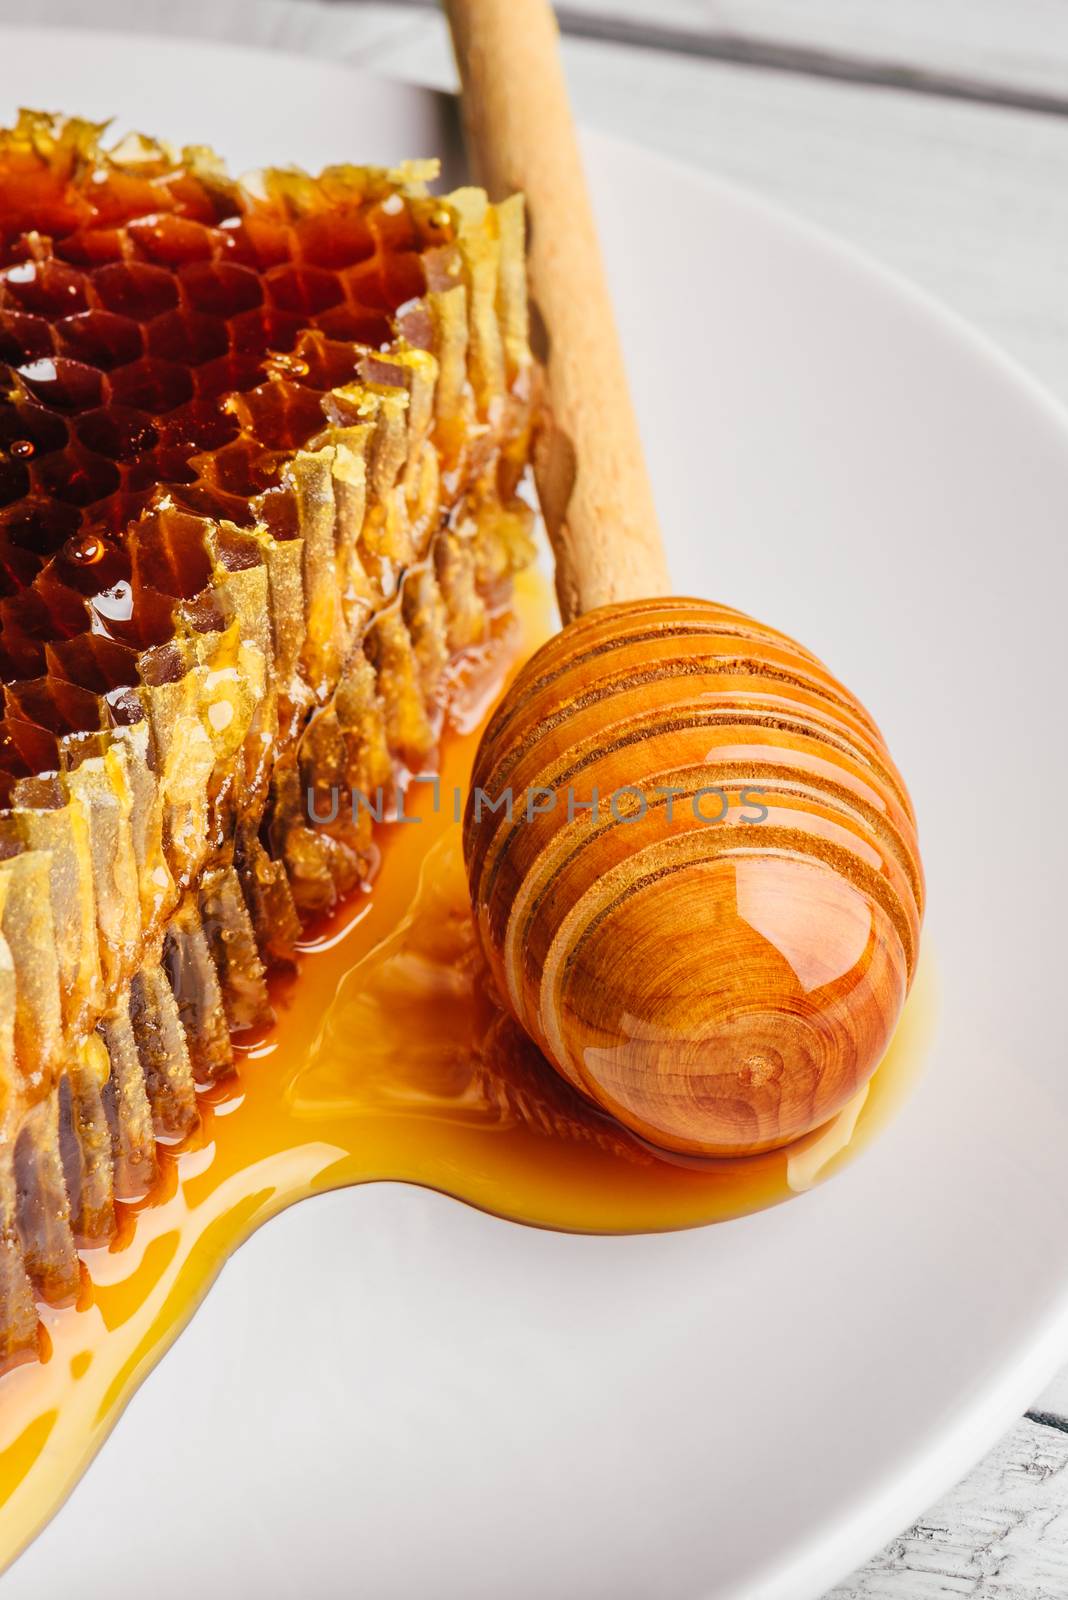 Honeycomb on plate with honey dipper by Seva_blsv